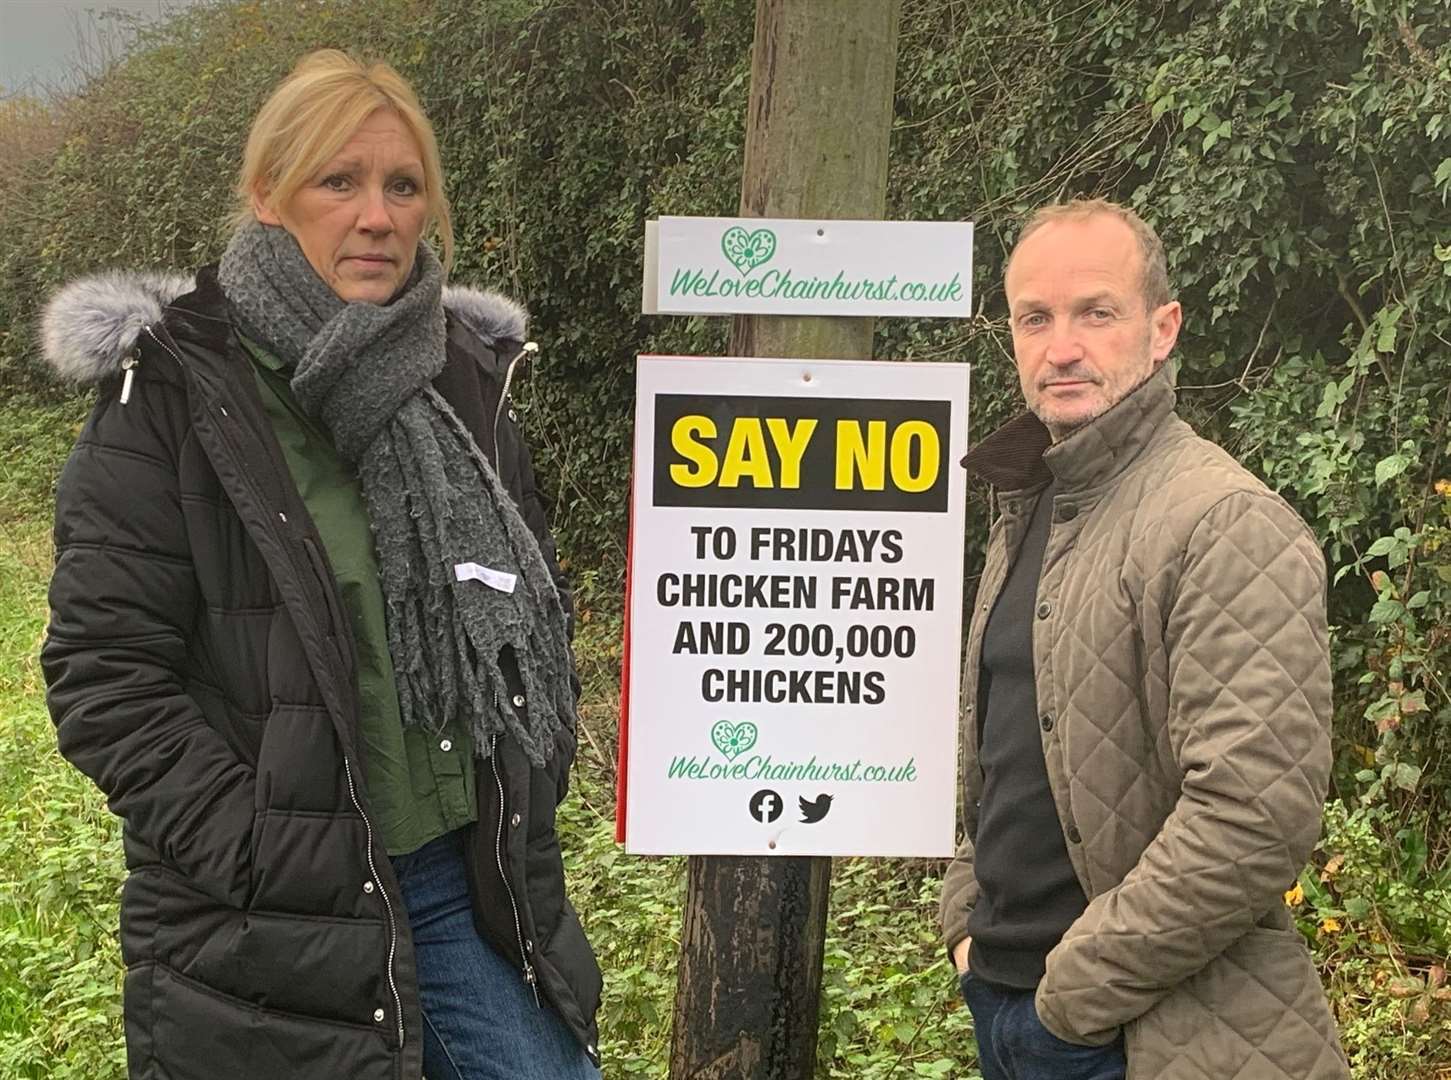 Adelle and Kevin Back at the site of the proposed chicken farm in Chainhurst